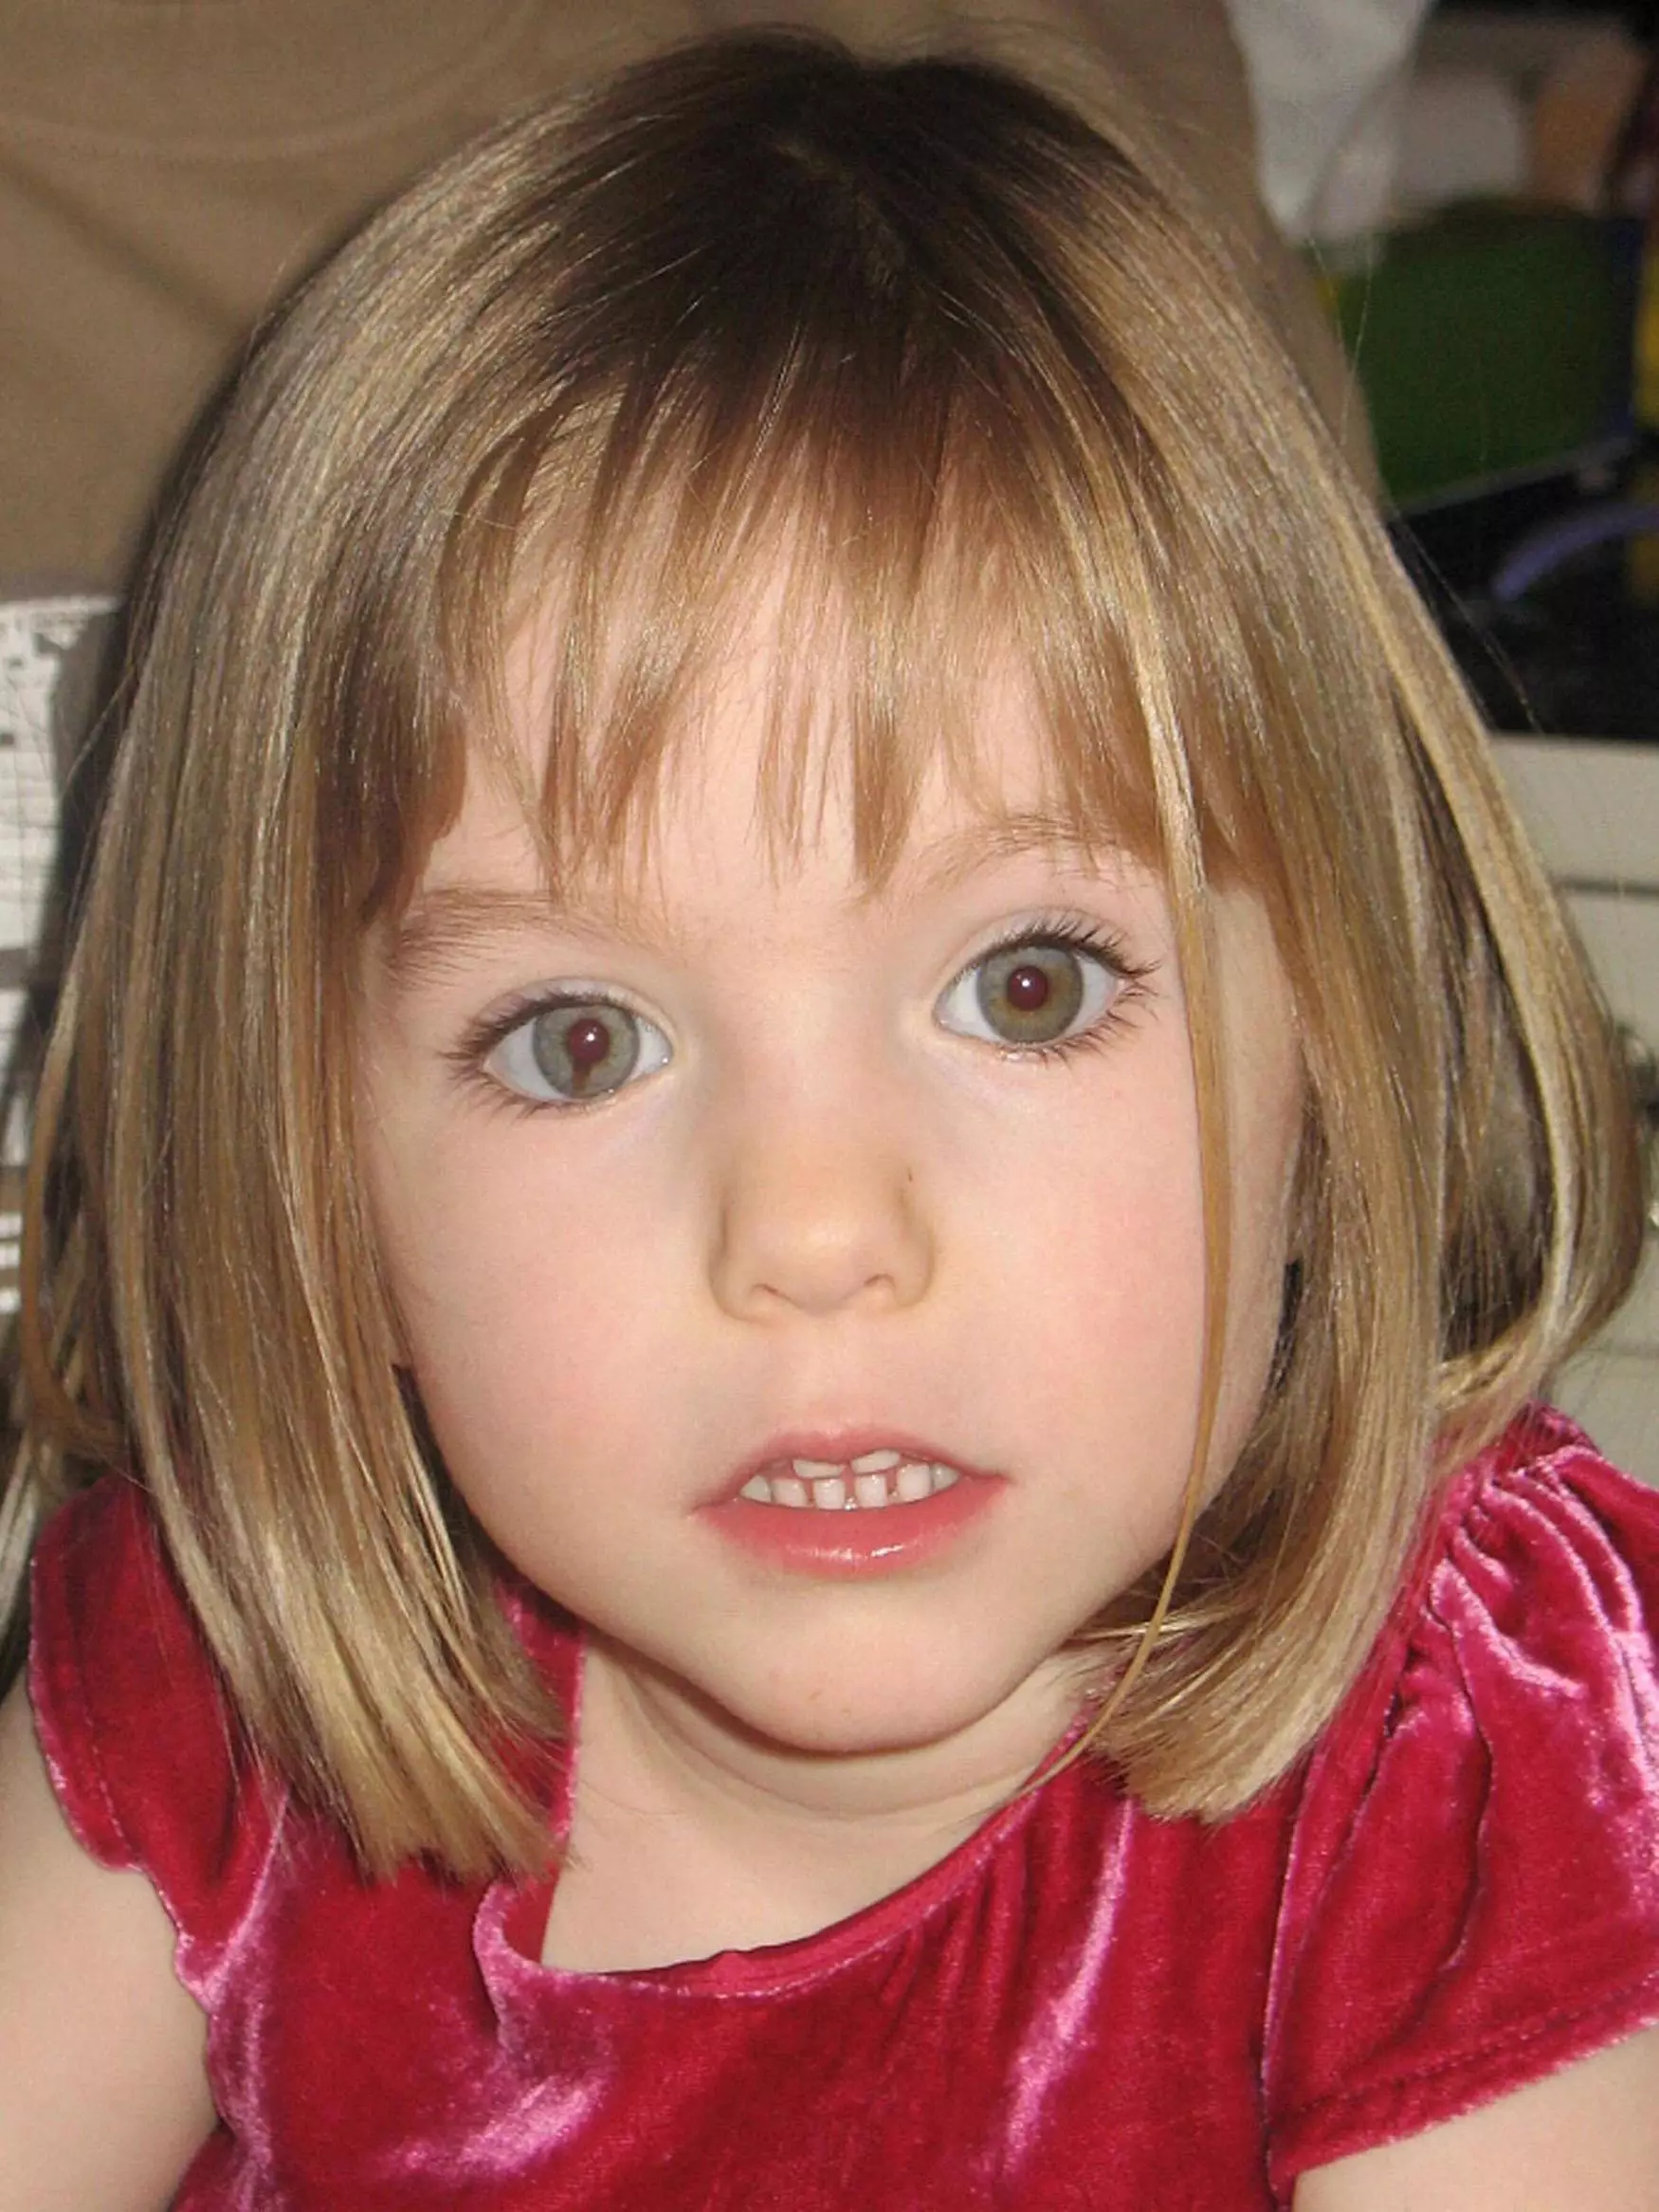 Photo of Madeleine McCann issued at the time of her disappearance in 2007.